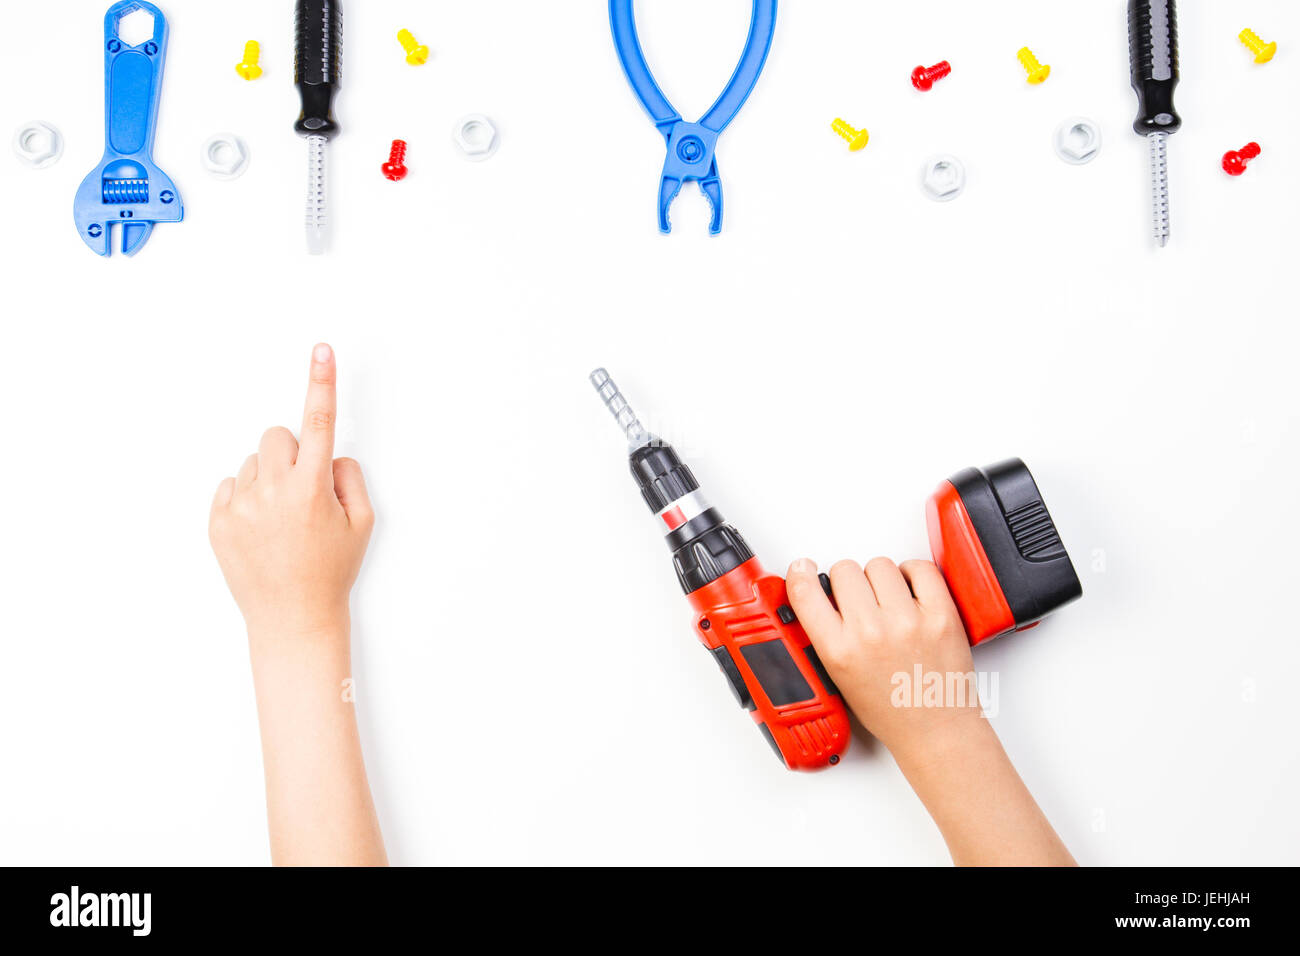 Child's hand holding drill and pointing finger to toys tools on the white background. Stock Photo